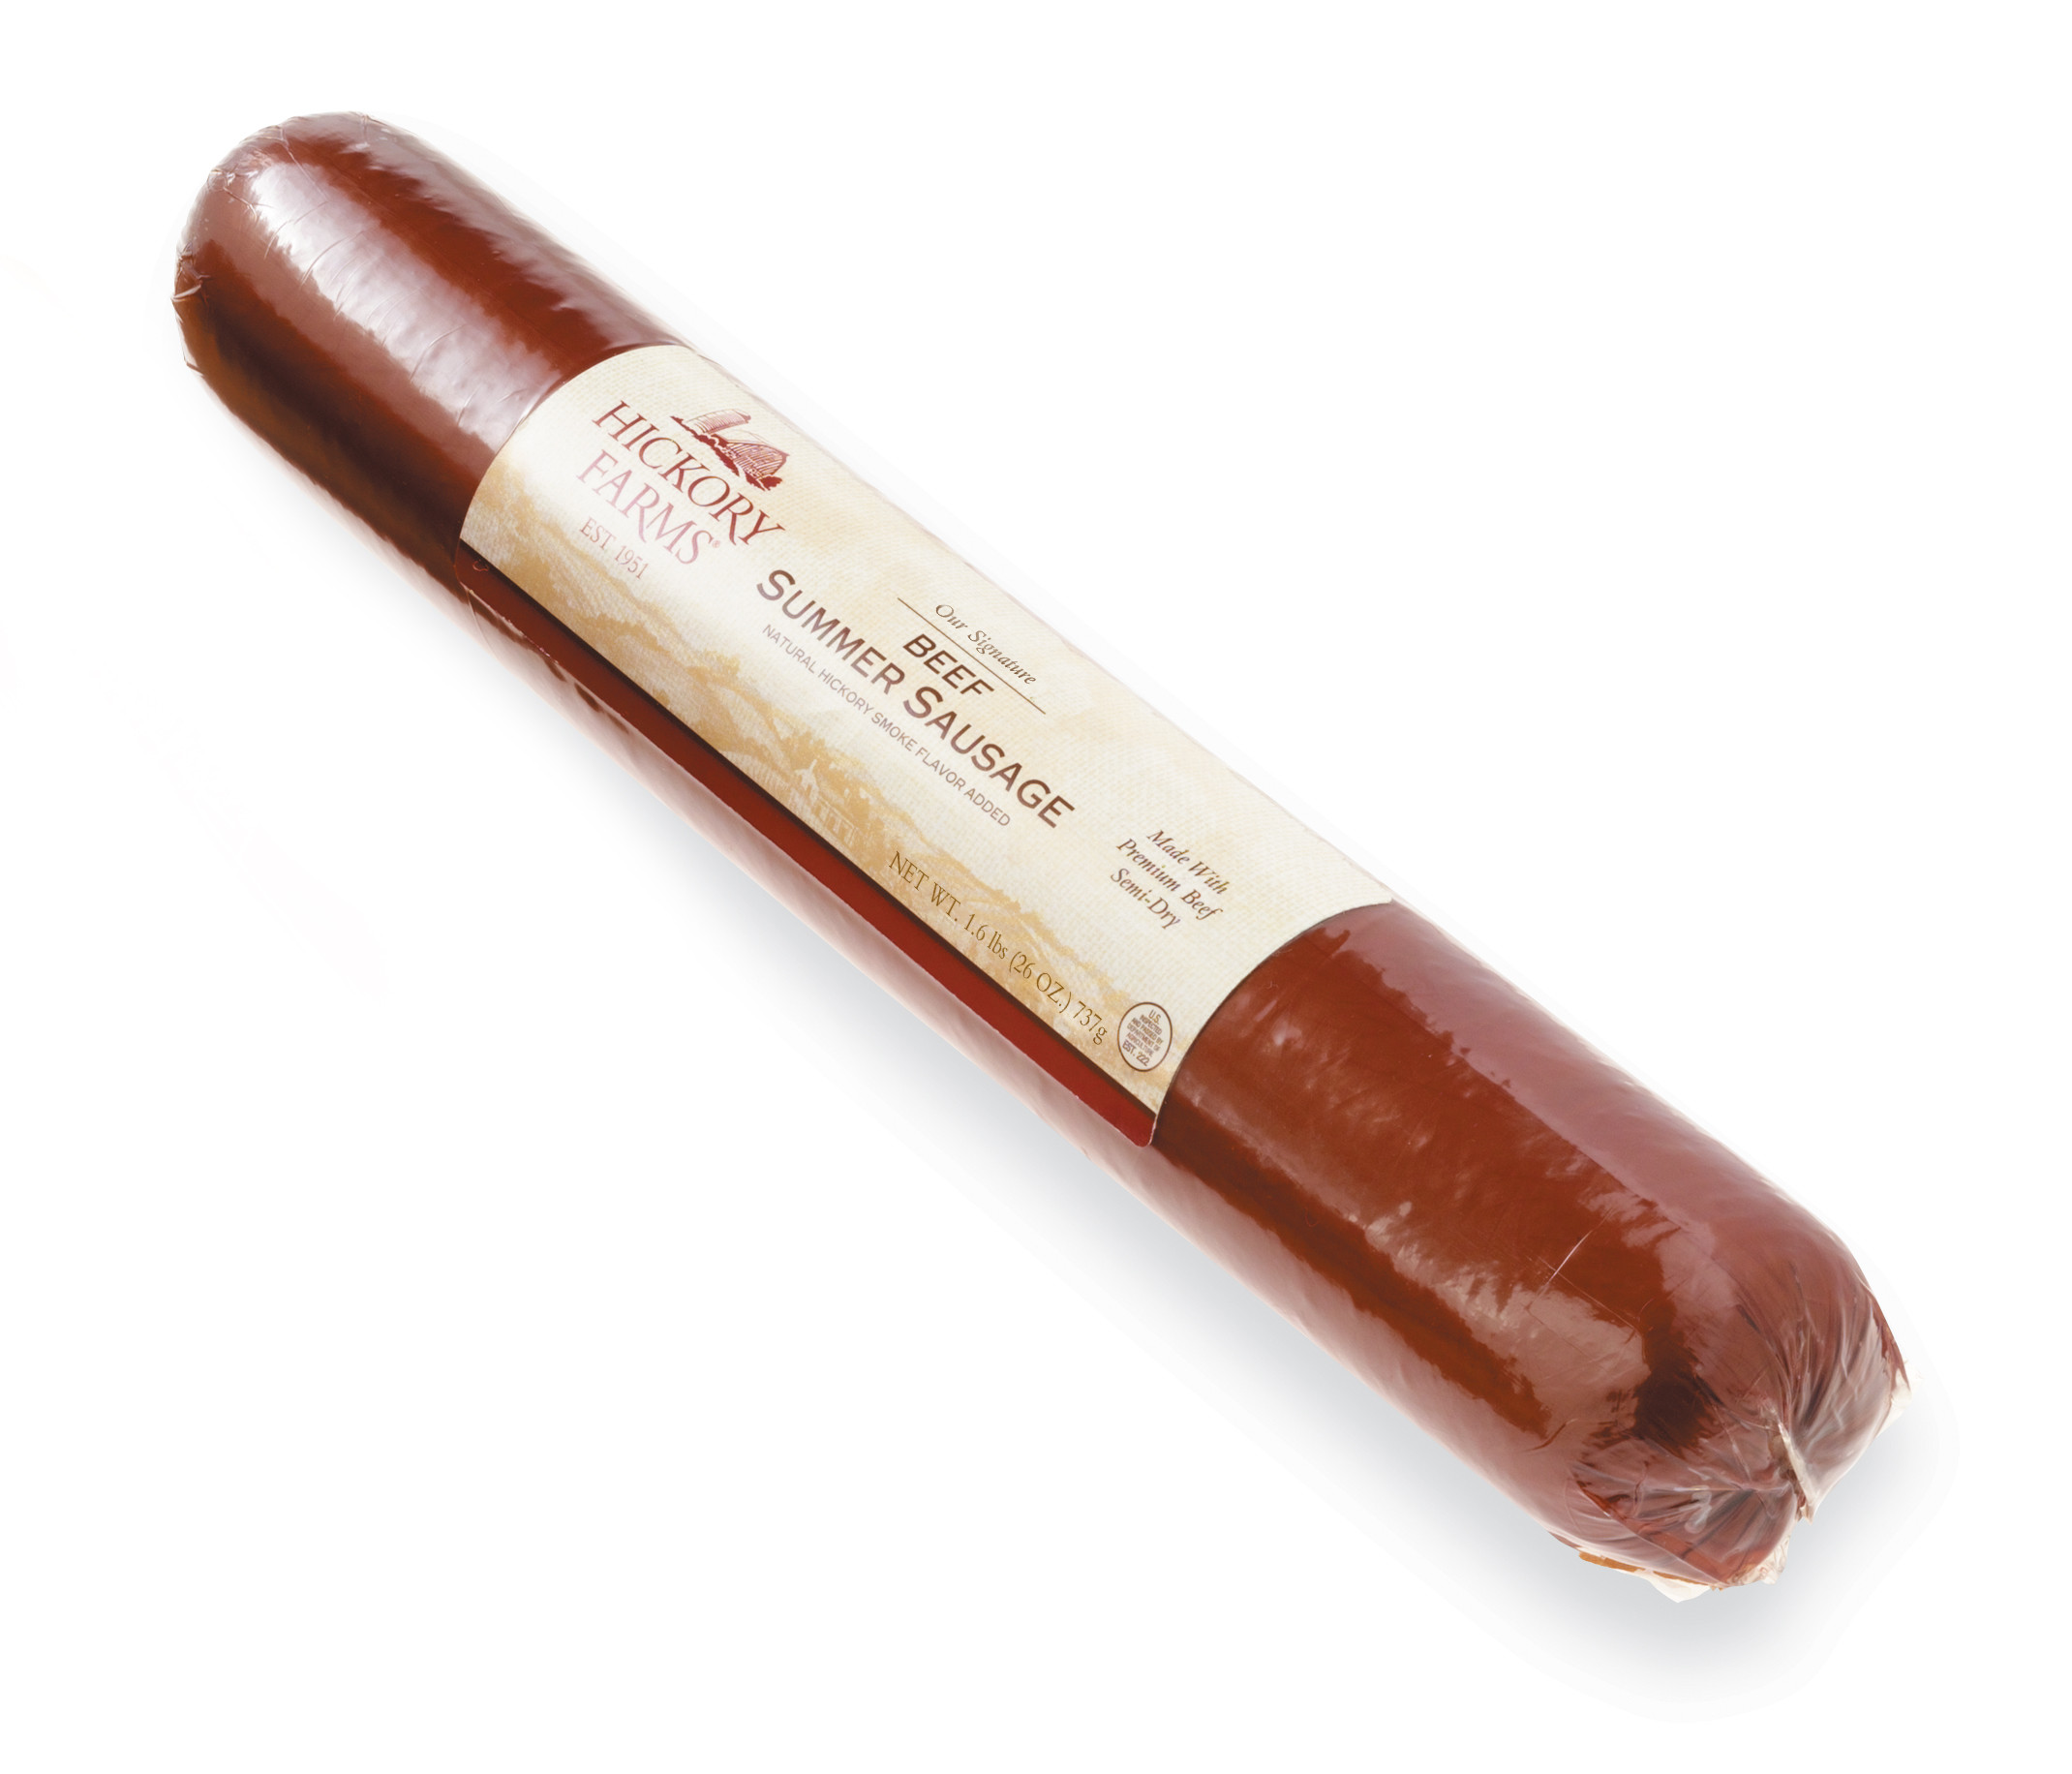 Hickory Farms Beef Summer Sausage
 Hickory Farms 26 oz Signature Beef Summer Sausage